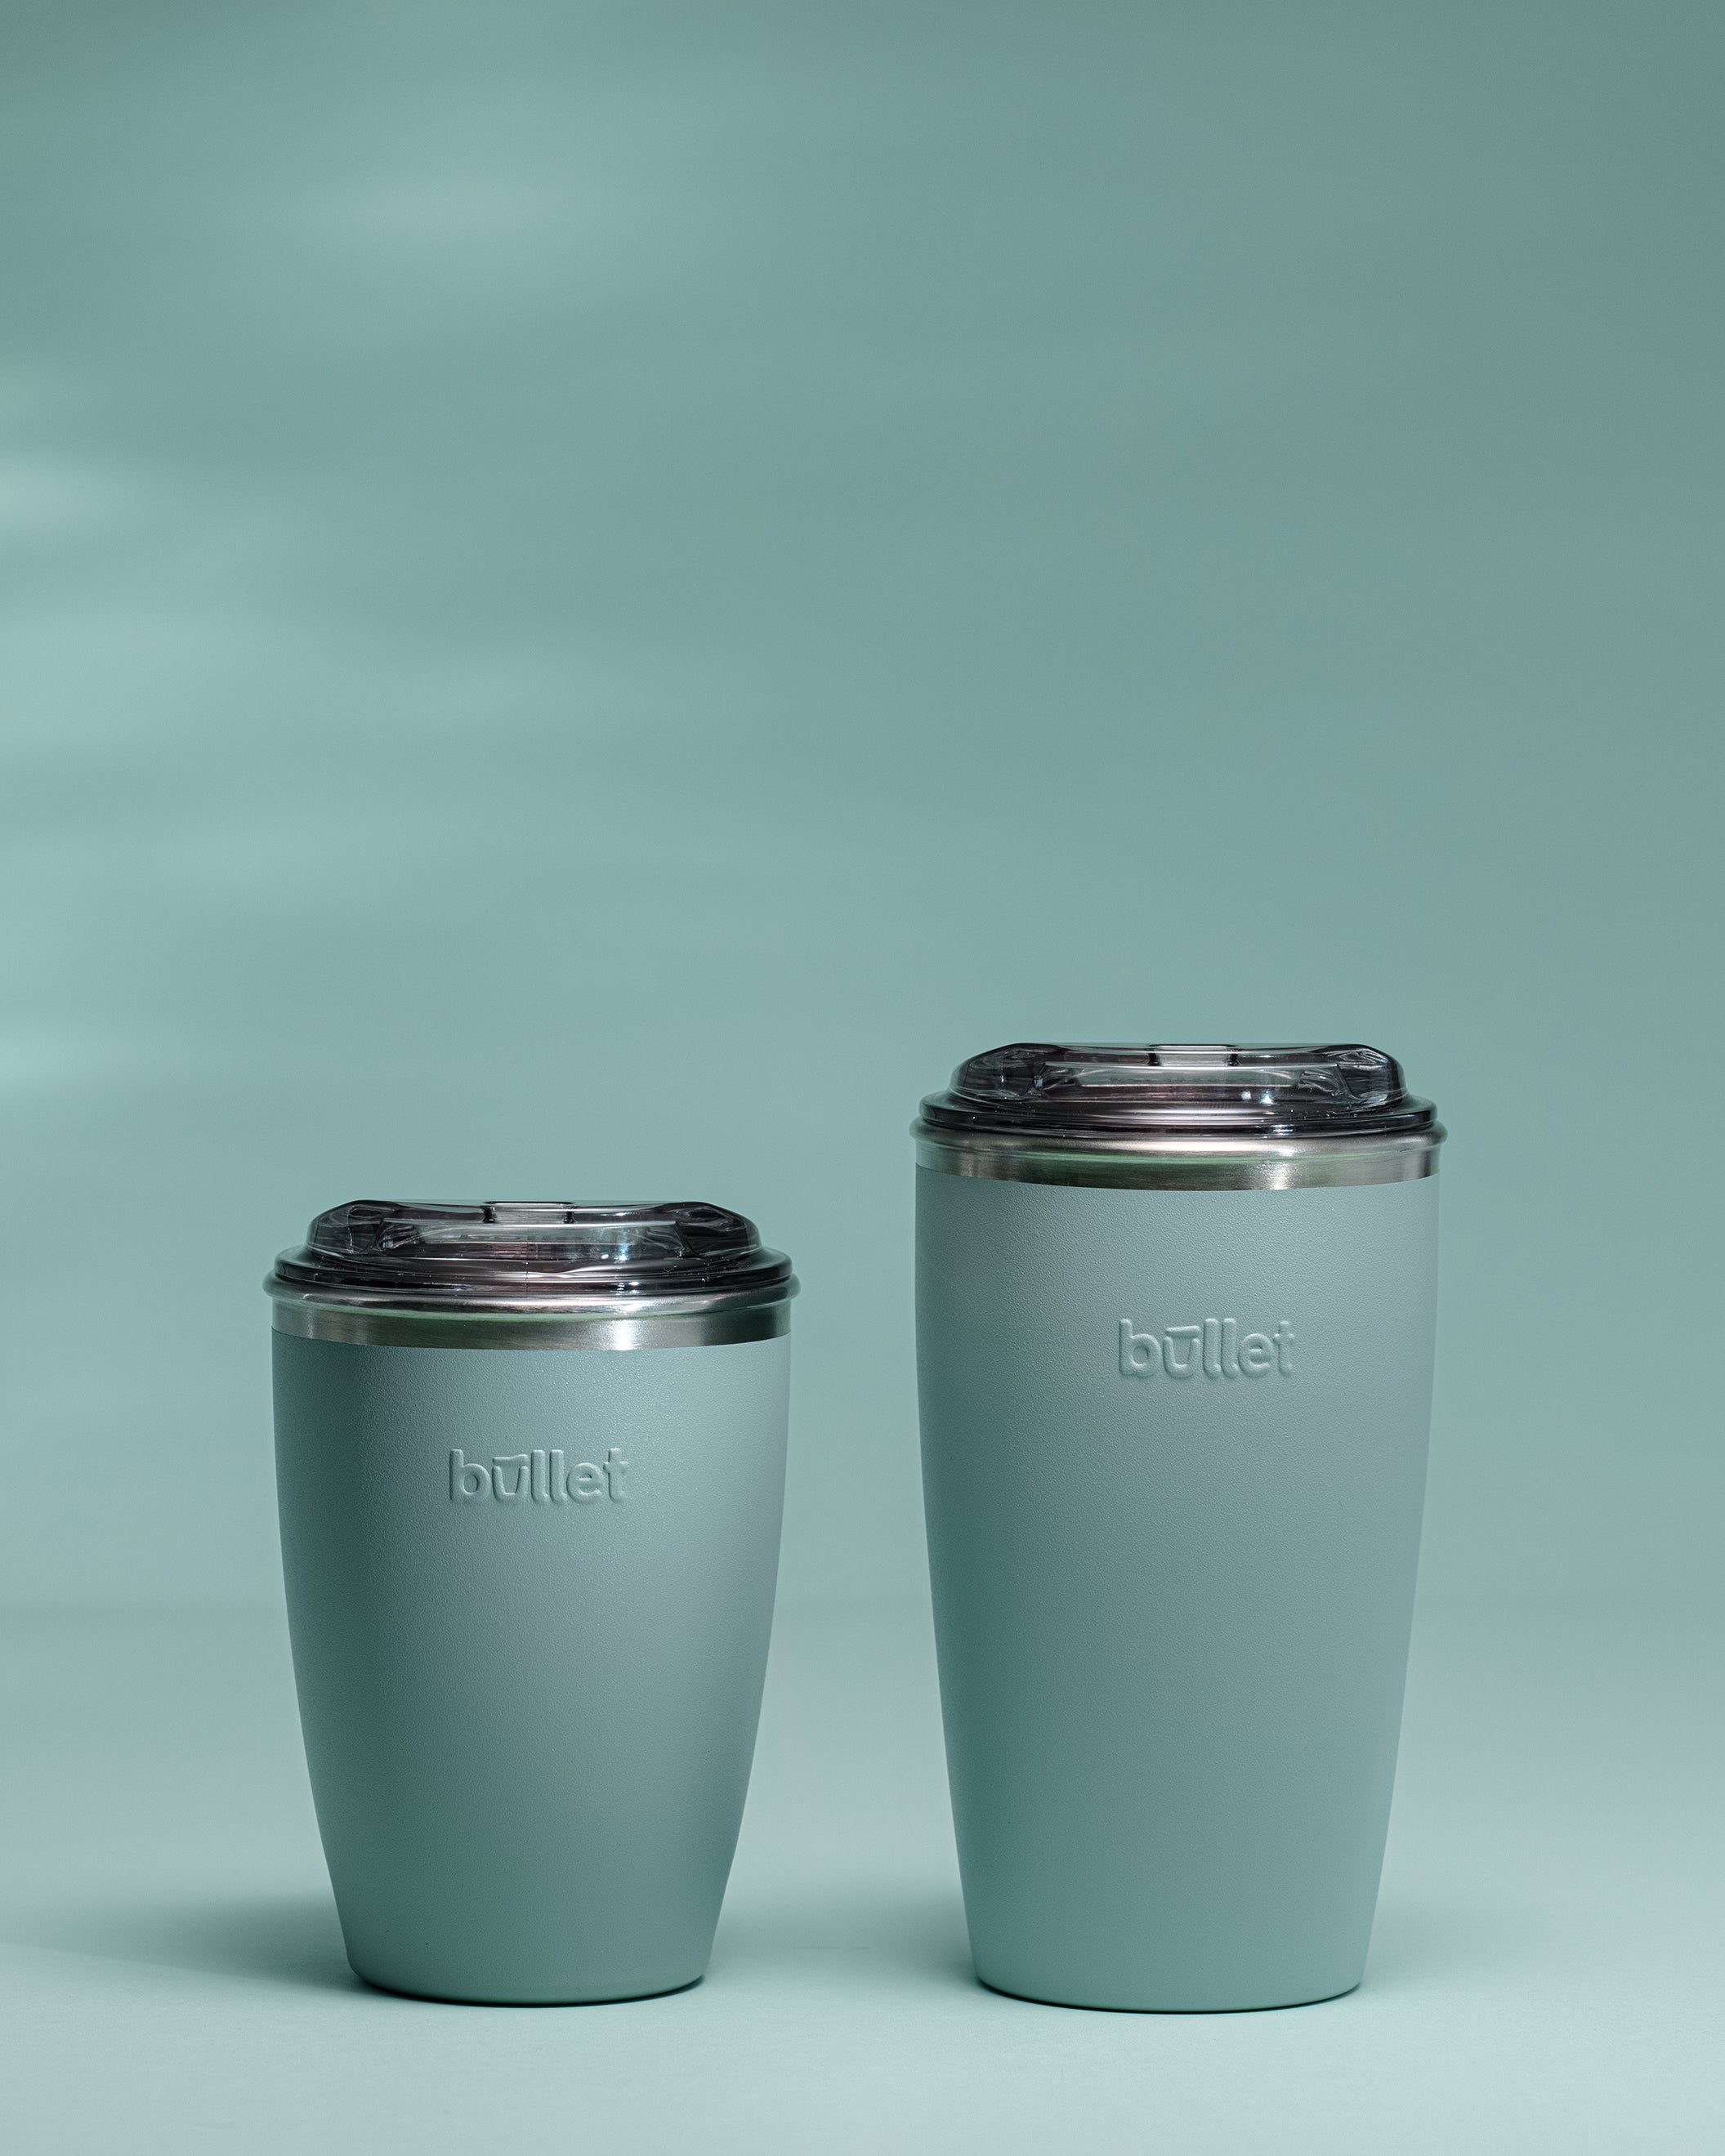 side by side comparison of an 8oz and 12oz green bullet cup